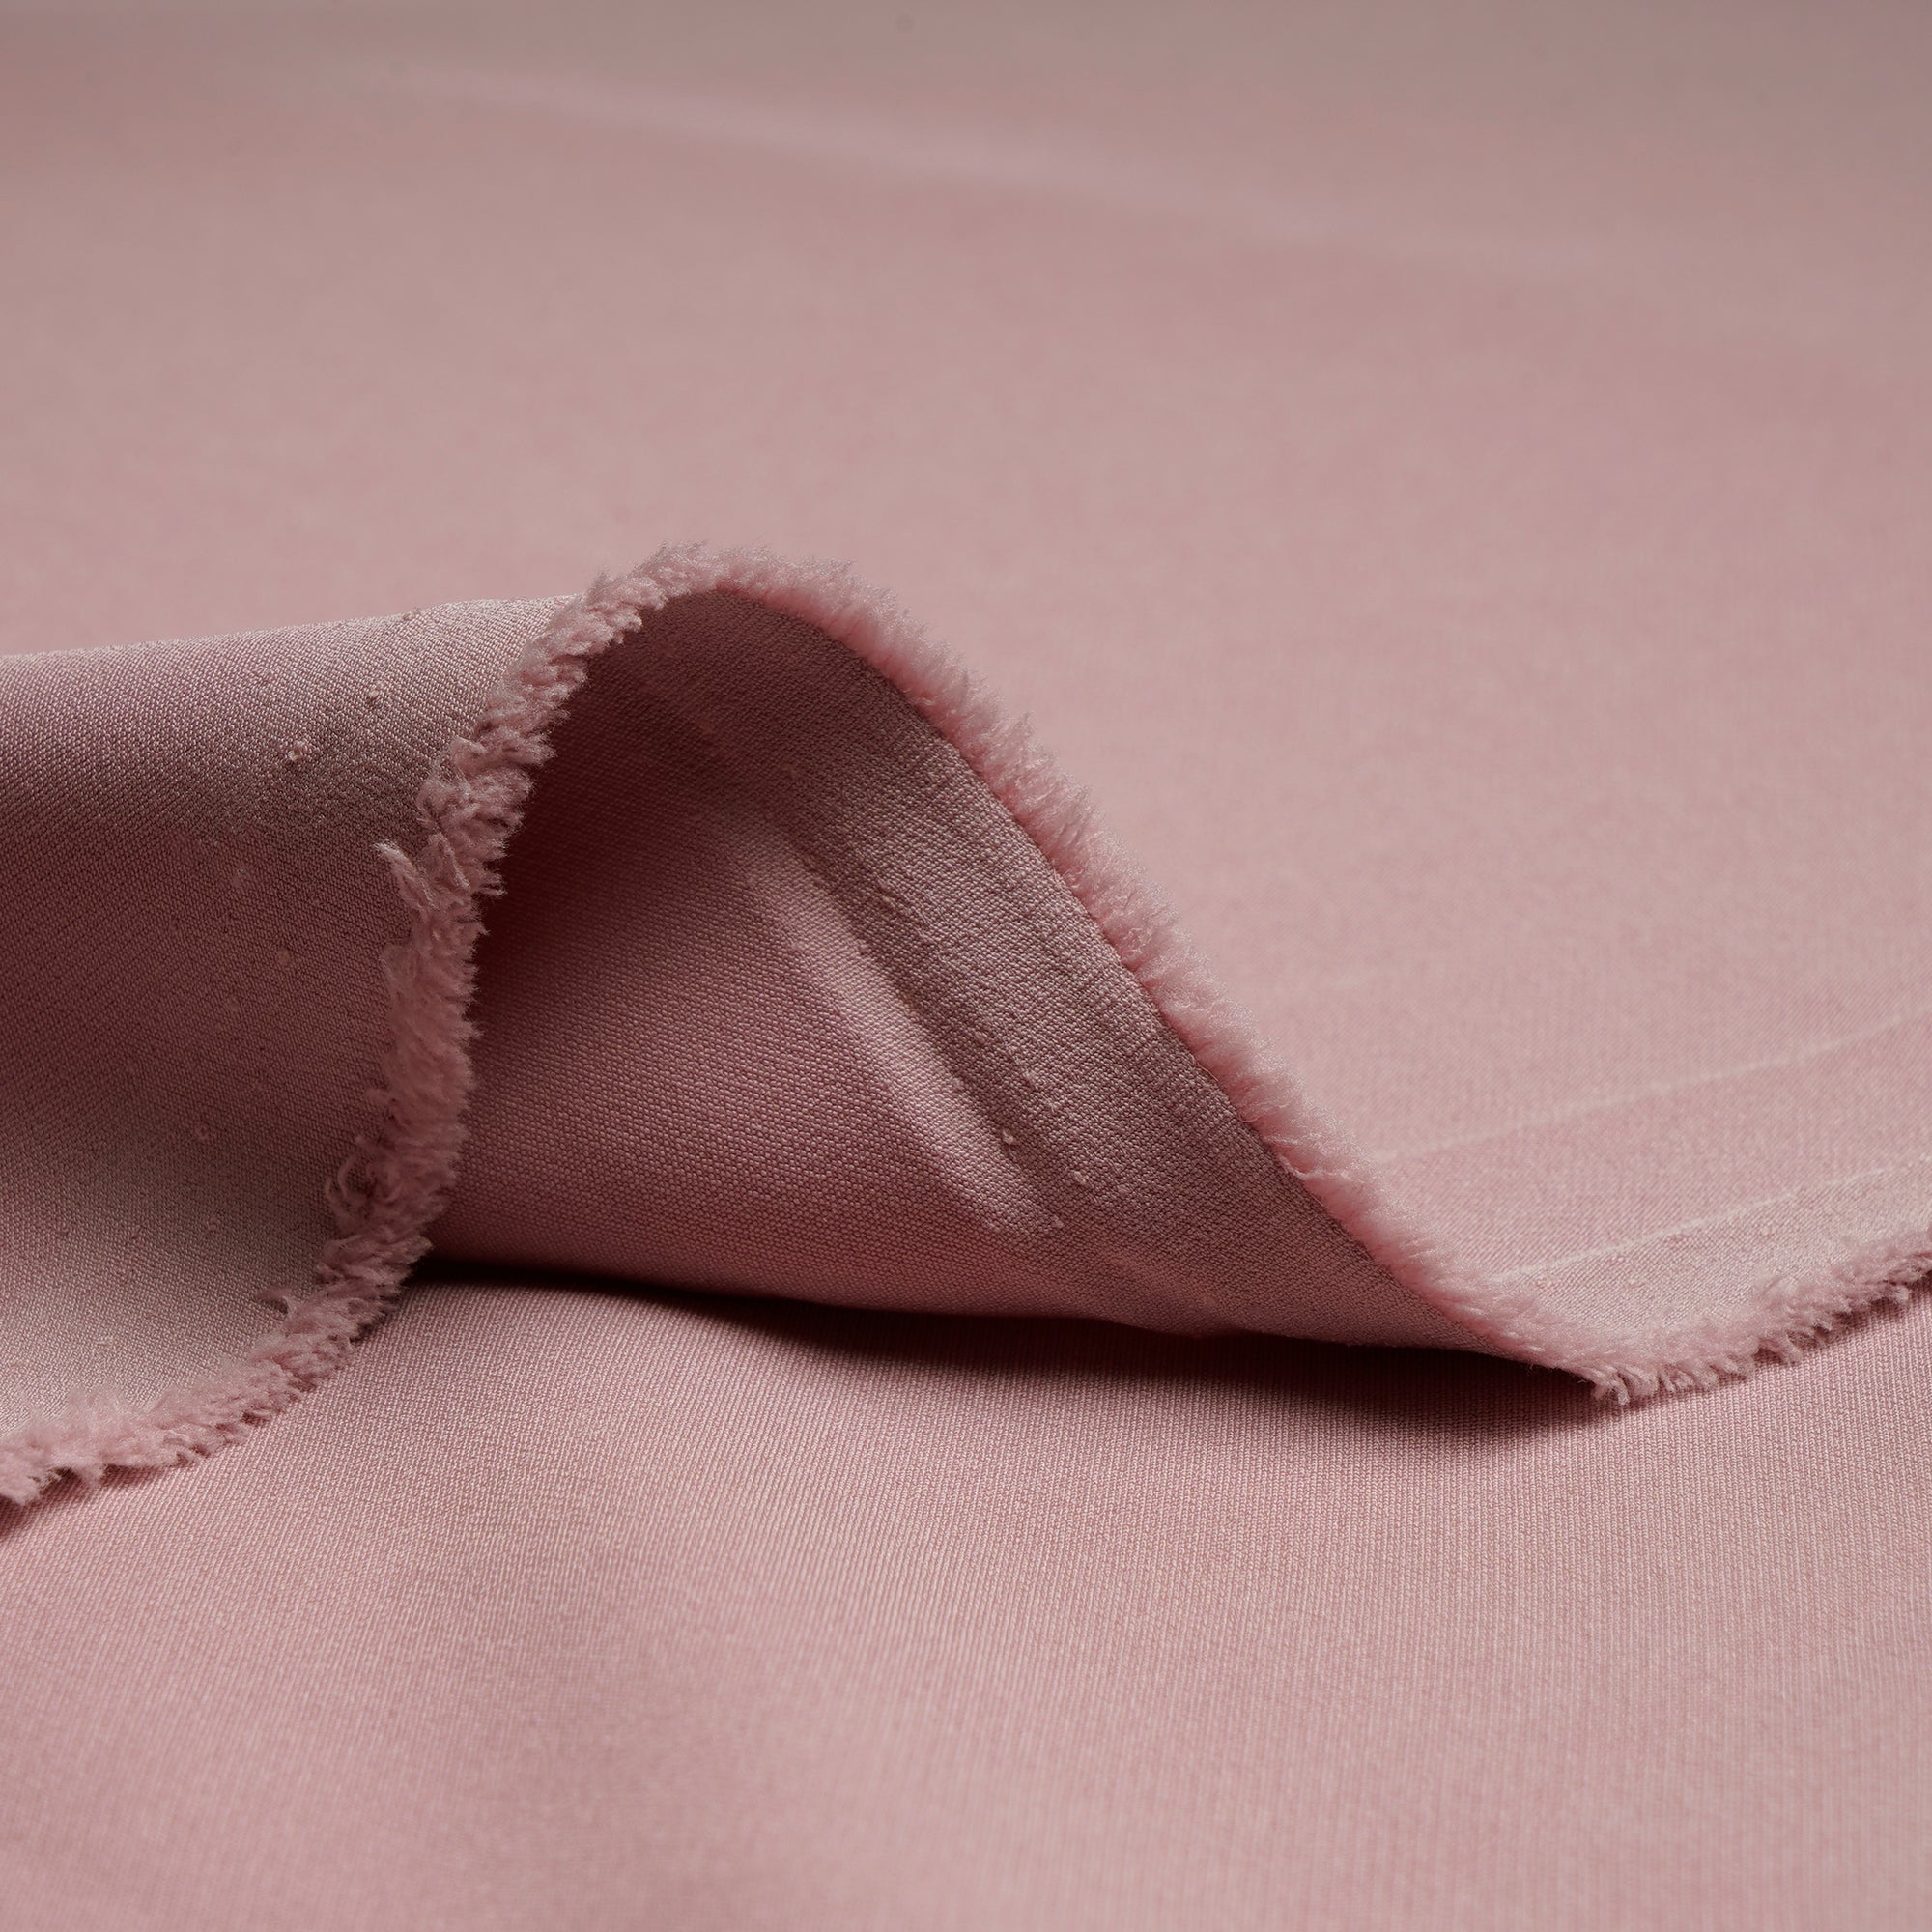 Peachskin Solid Dyed Imported Banana Crepe Fabric (60" Width)